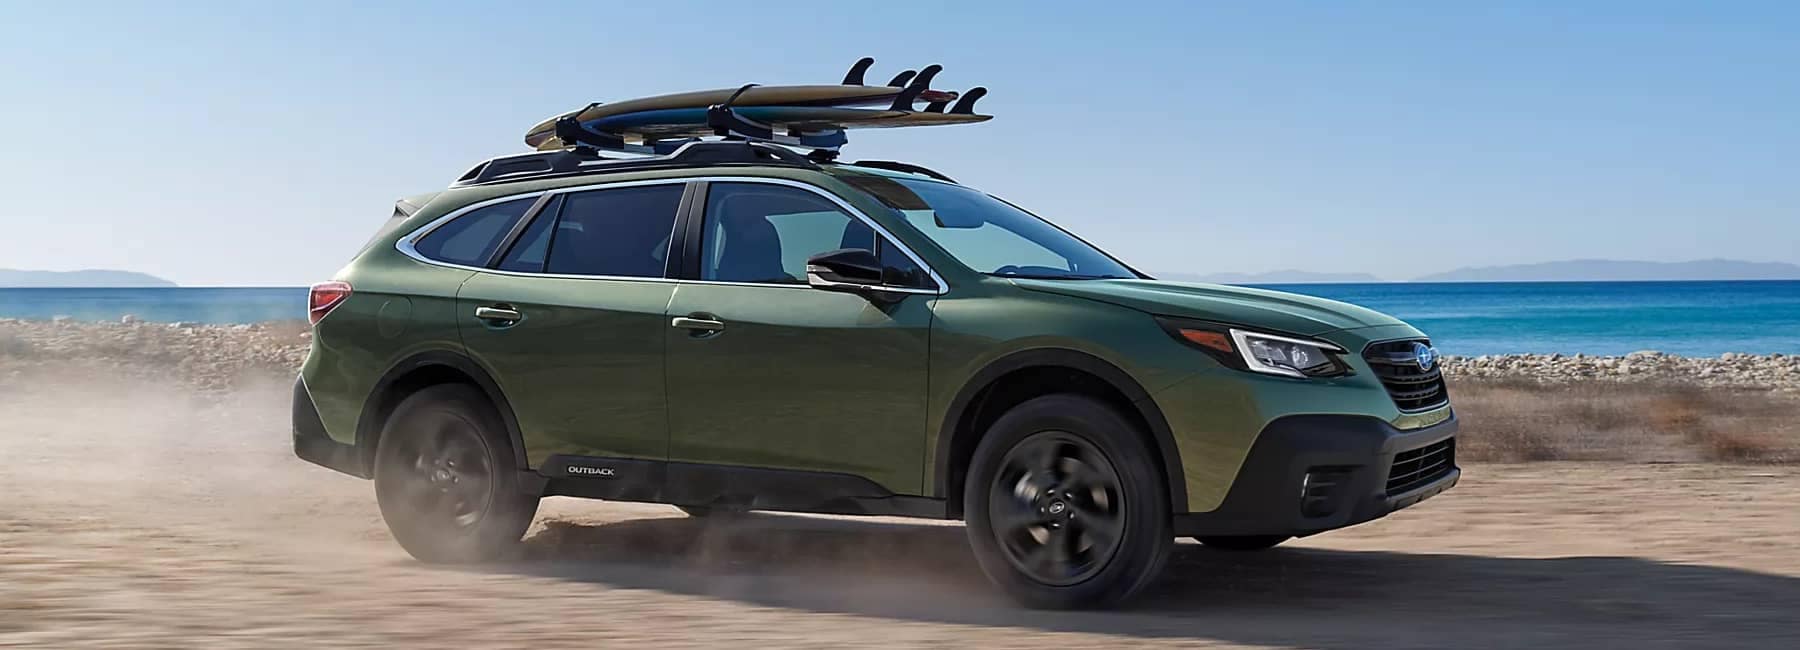 2022 Subaru Outback-side view-driving down beach-ocean in background-green